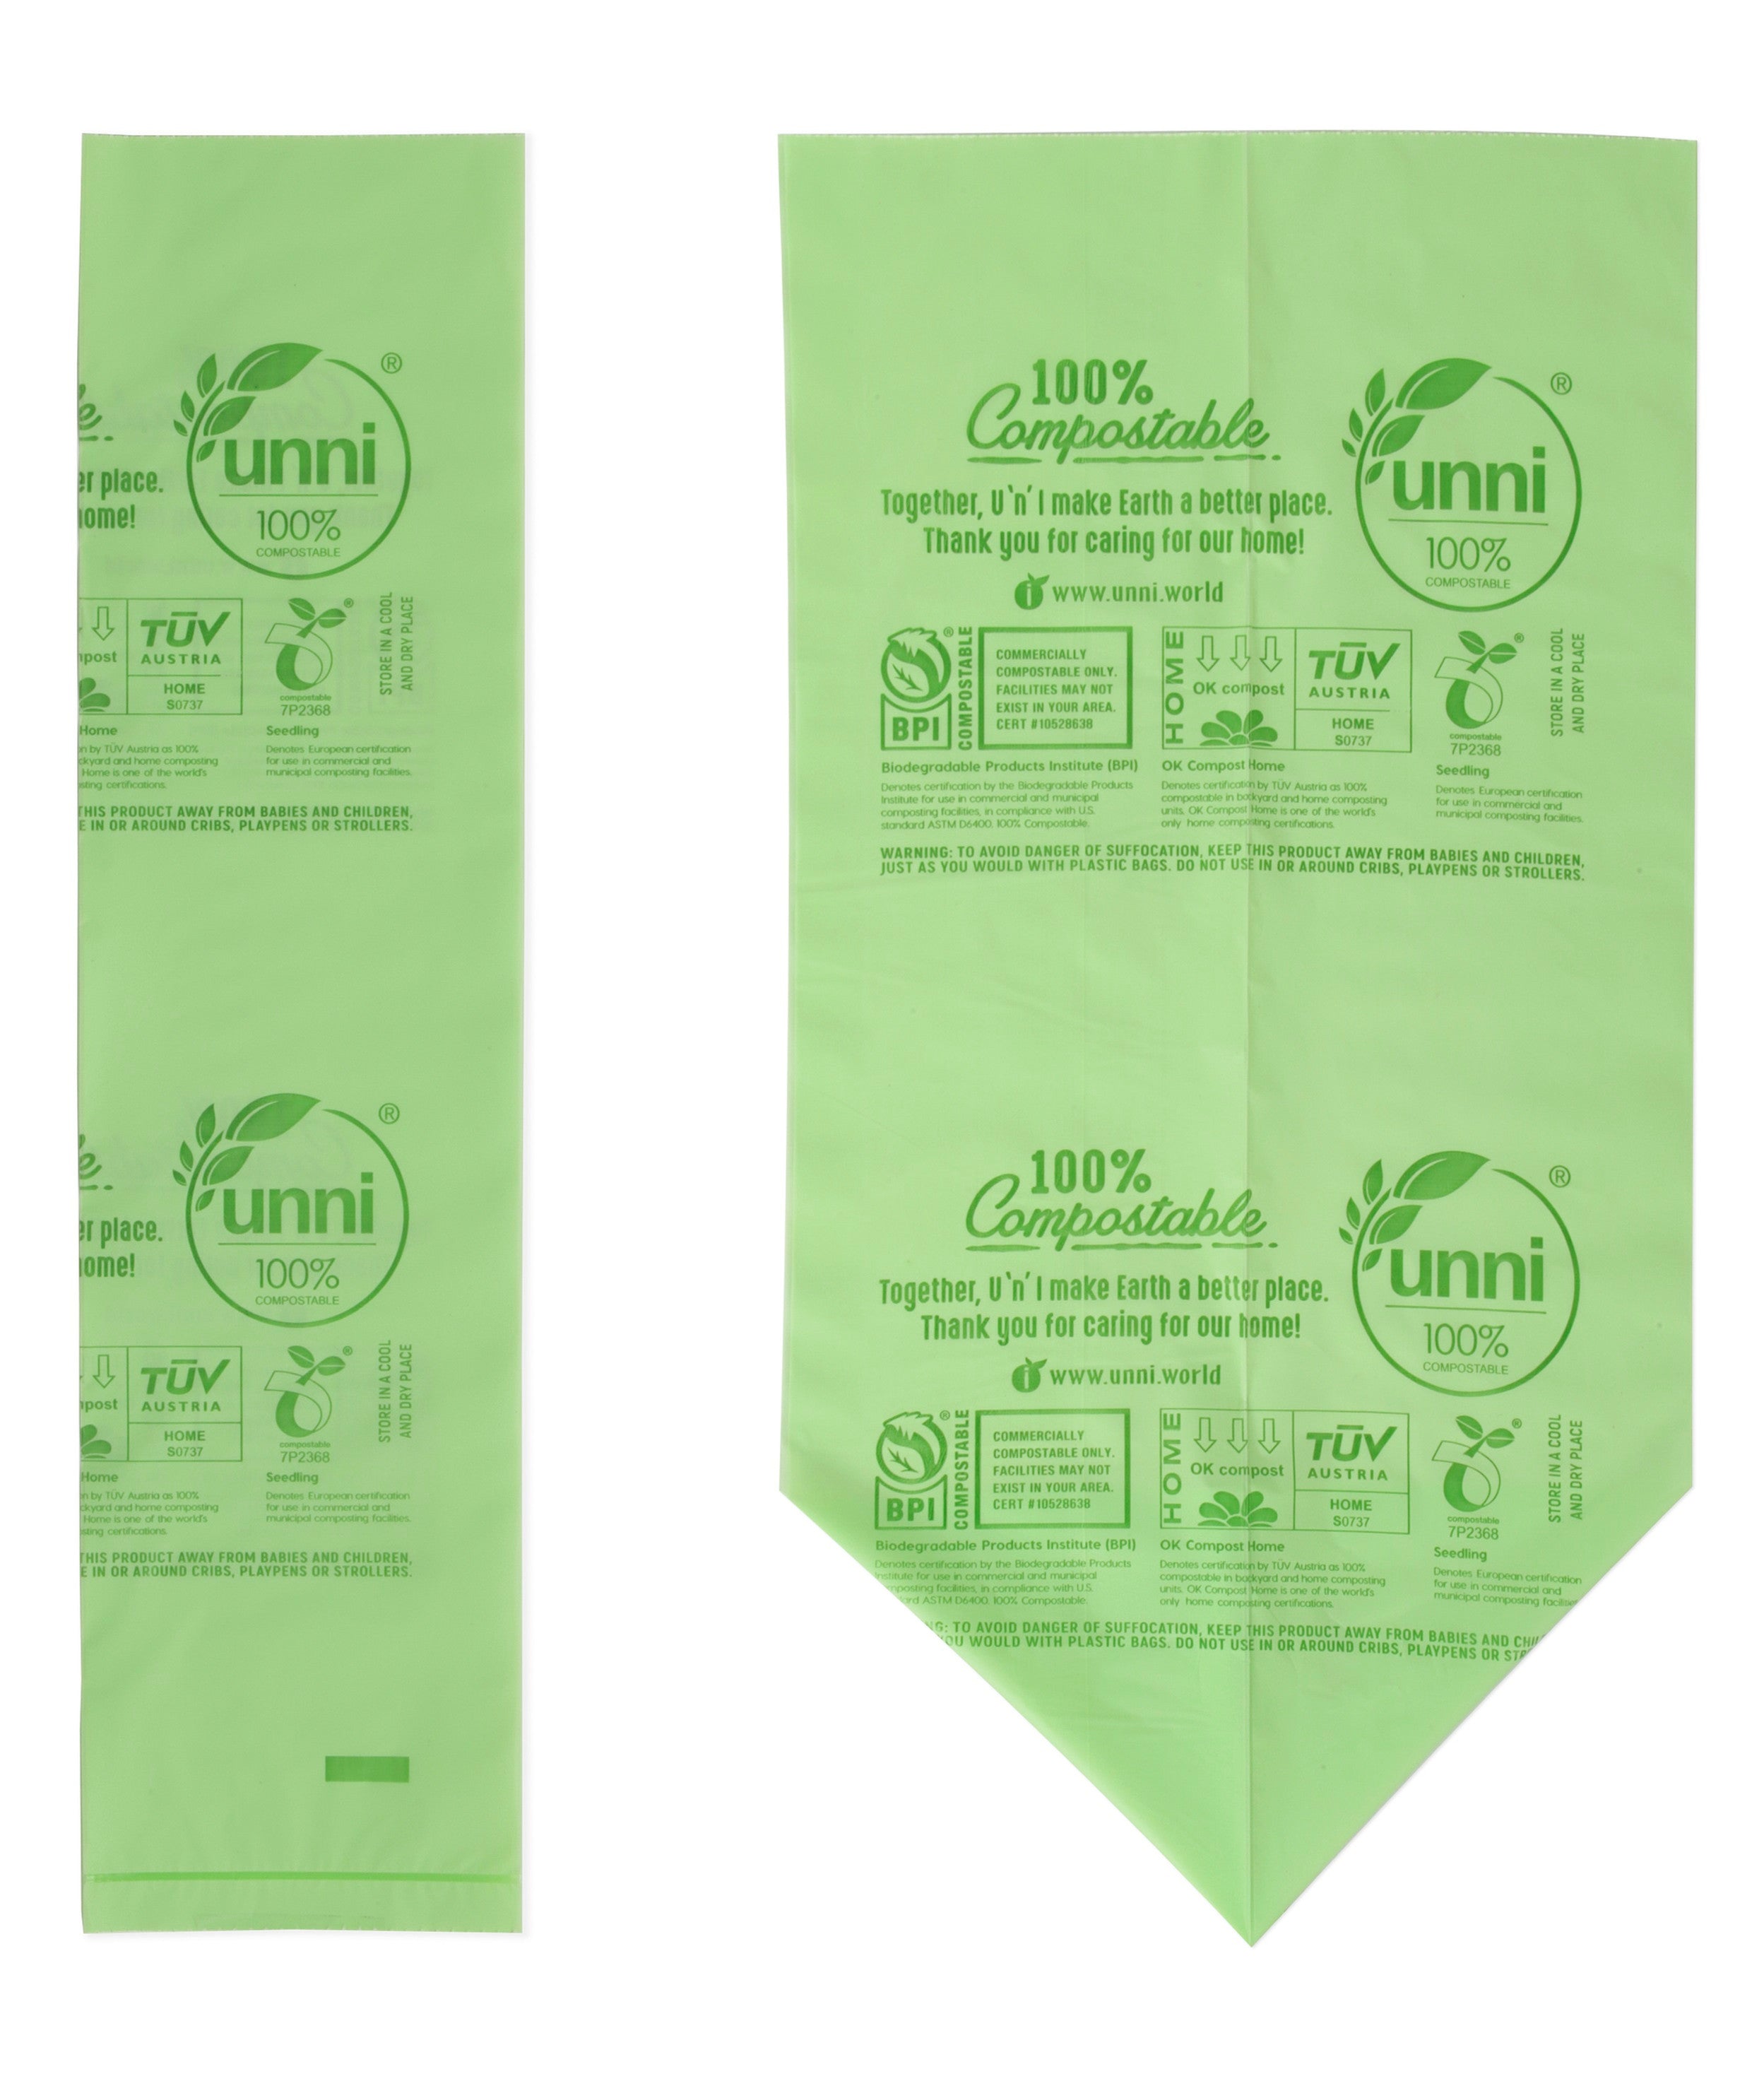 4 Gallon Compostable Small Waste Bags